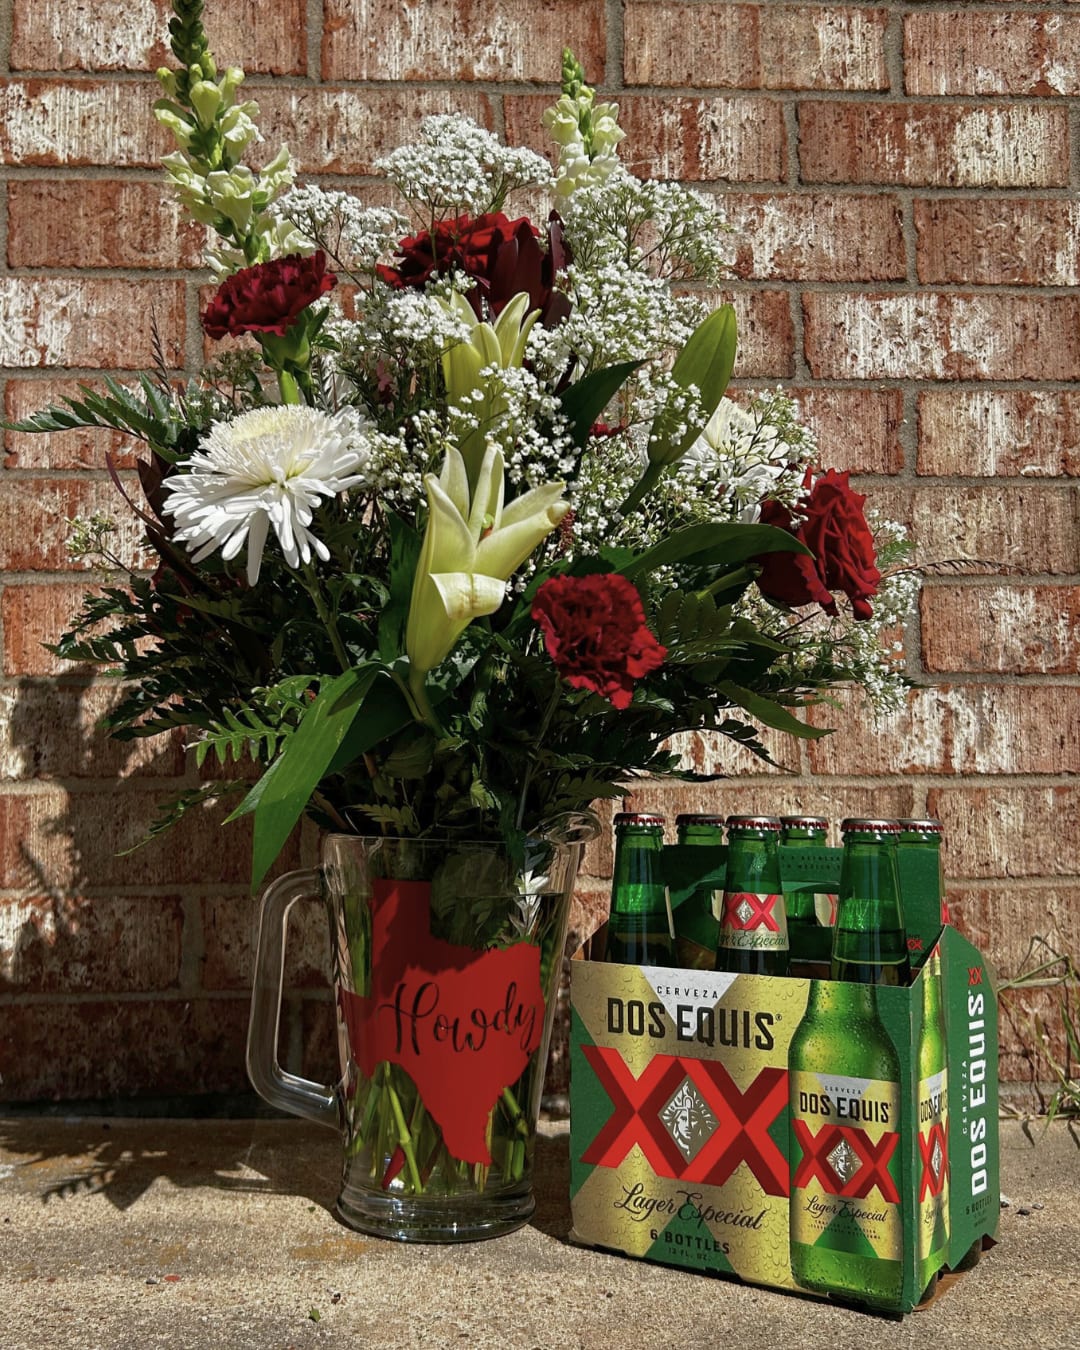 Aggie Ring Dunk Bouquet - With Beer - The perfect gift for Ring Day! A full sized beer pitcher filled with flowers featuring lilies, roses, and more. Comes with a pack of beer, a perfect gift for a ring dunk!  **IMPORTANT INFO: Orders containing alcohol must be purchased by individuals over the age of 21, or of legal drinking age in your area. Delivery MUST be within our serviced area and must be accepted by an individual over 21 with valid ID. Deliveries can not be delivered to areas where consumption is prohibited (business offices, campus dorms, etc.).